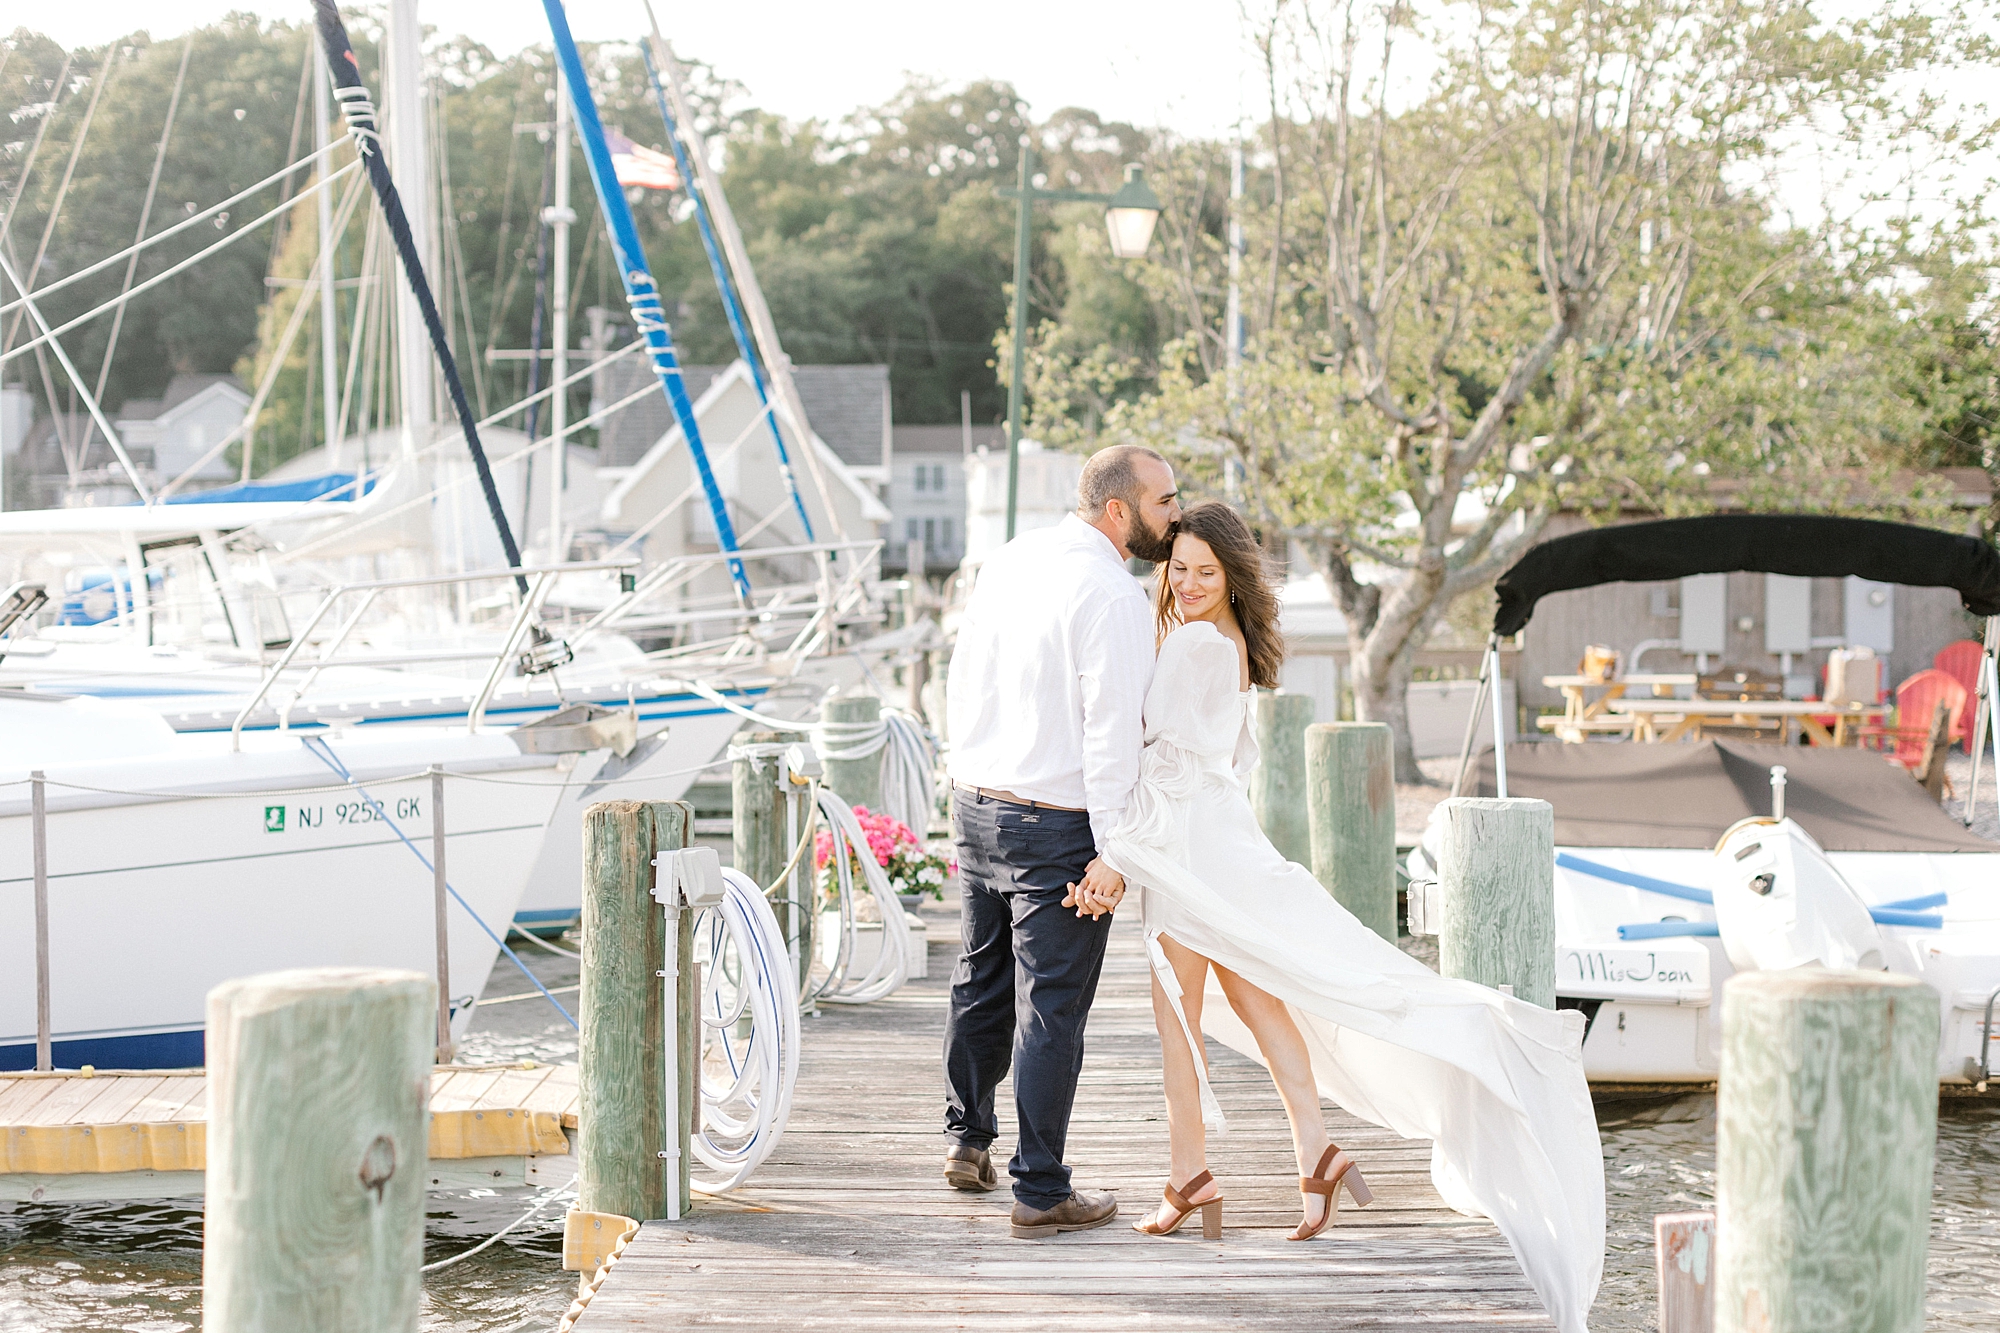 groom leans to kiss bride on wooden dock before getting on boat on Toms River